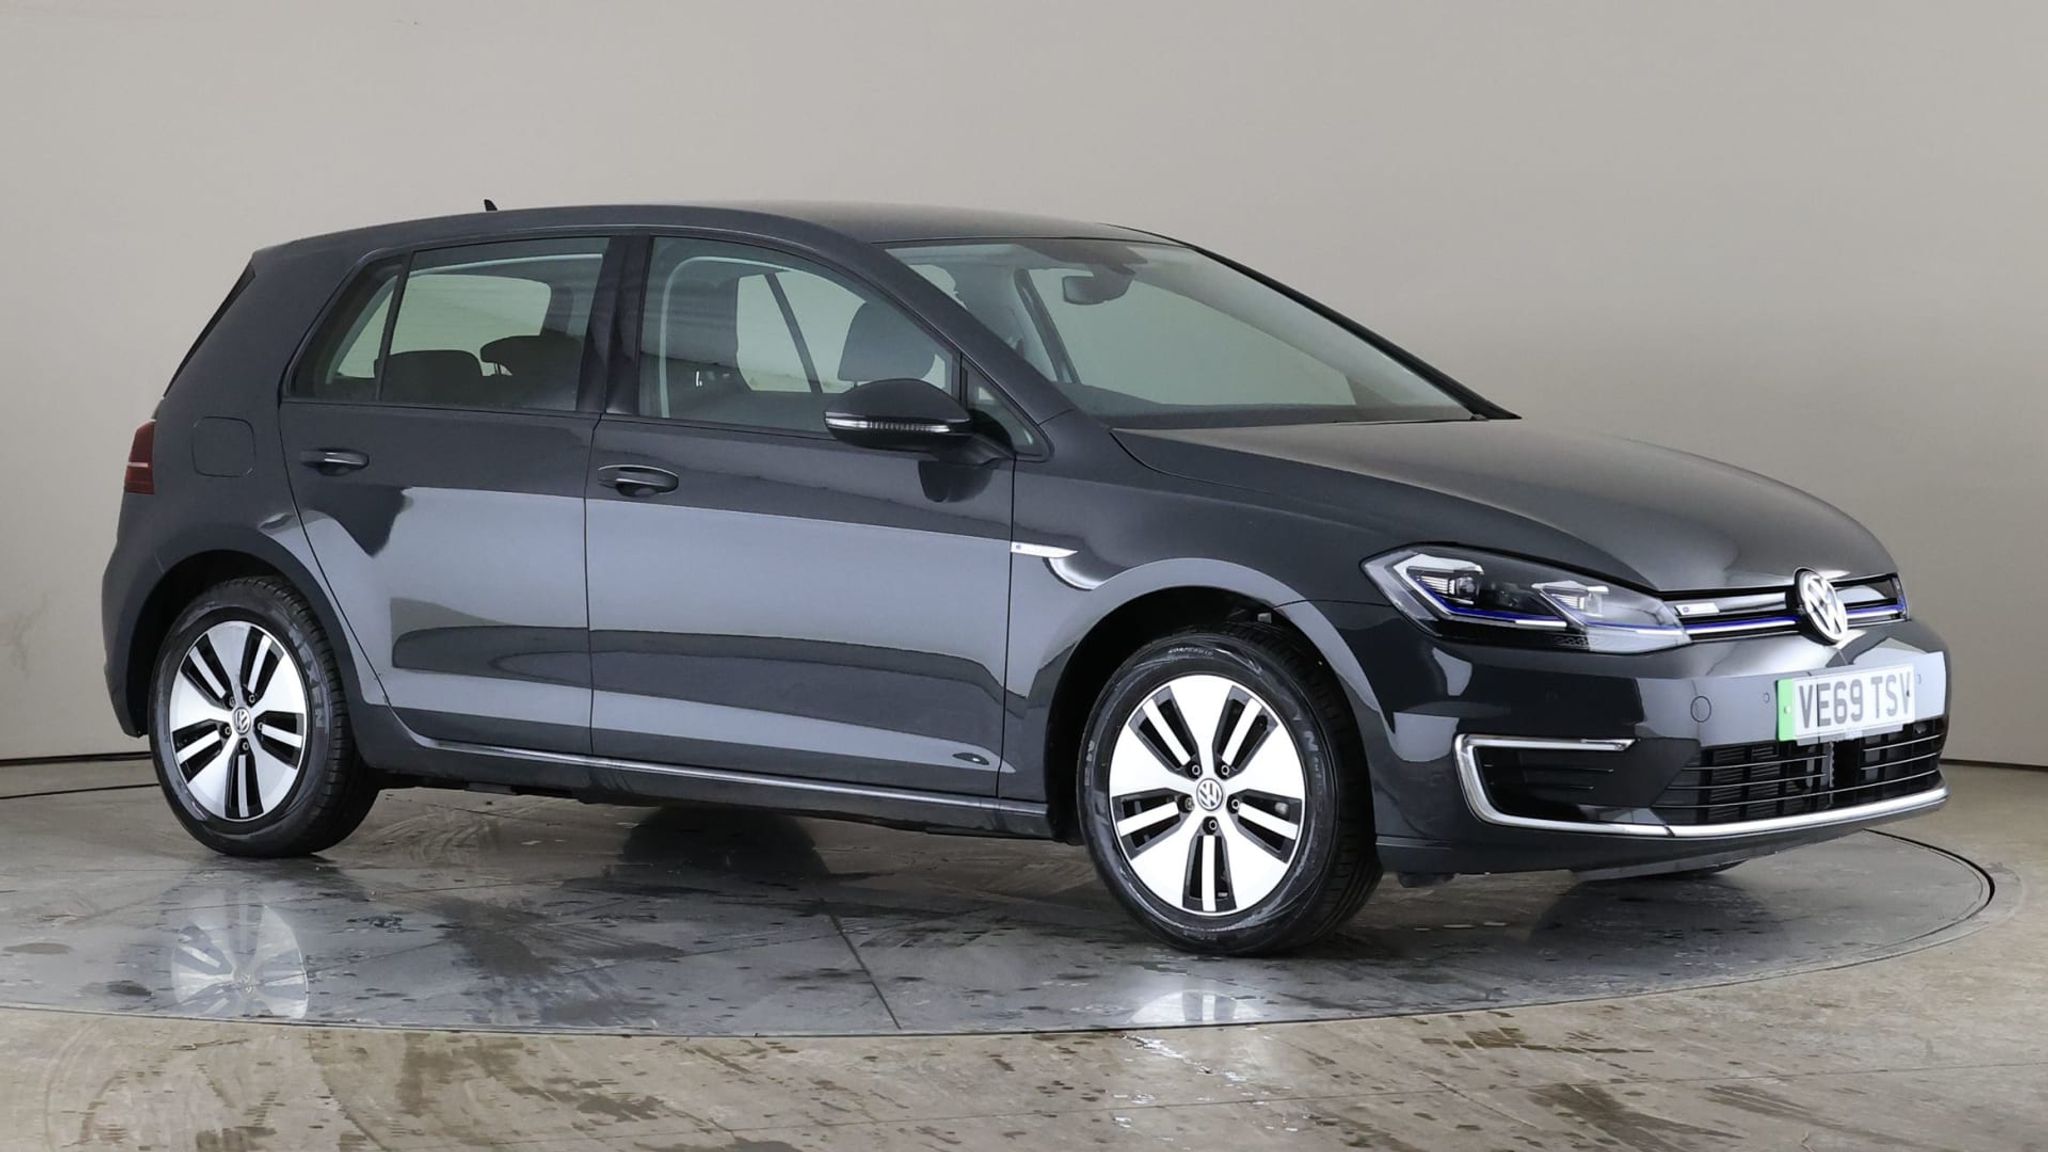 2020 used Volkswagen E-golf 35.8kWh e-Golf (136 ps)